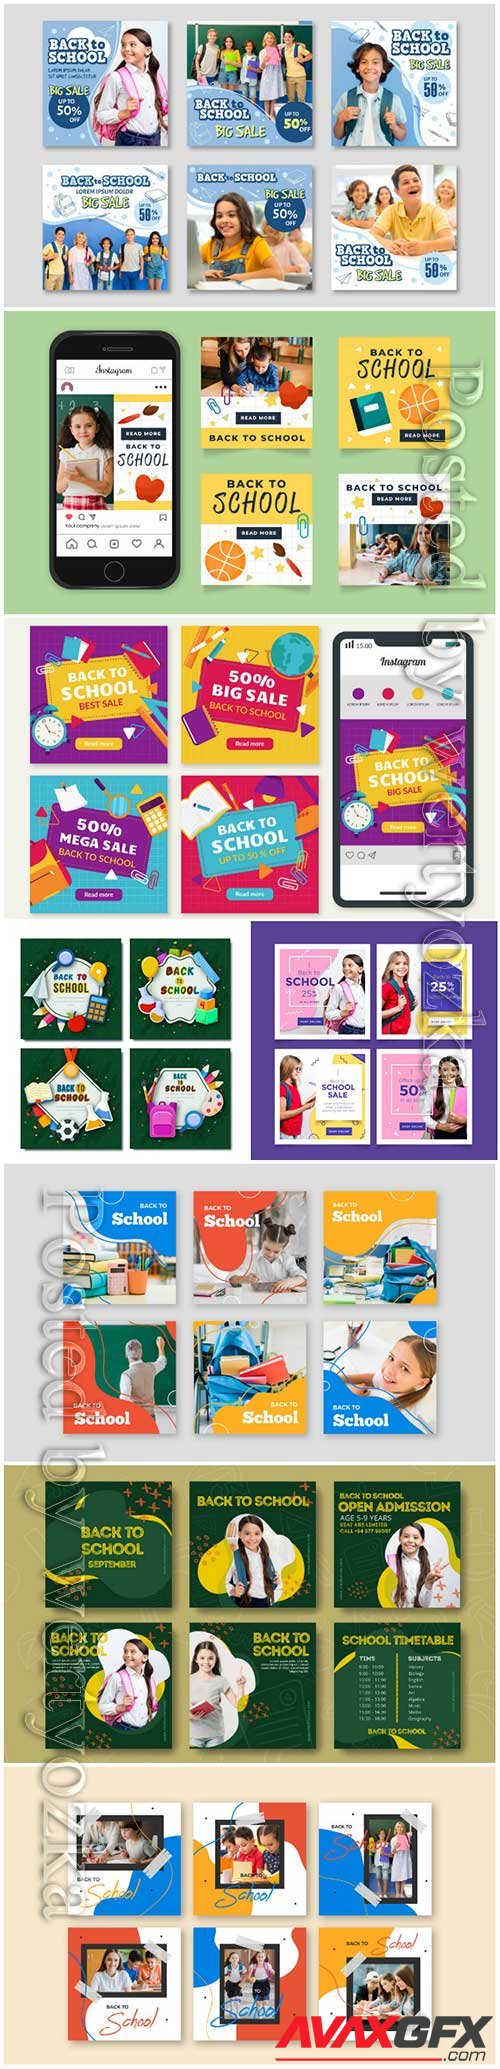 Hand drawn back to school instagram post collection vector illustration